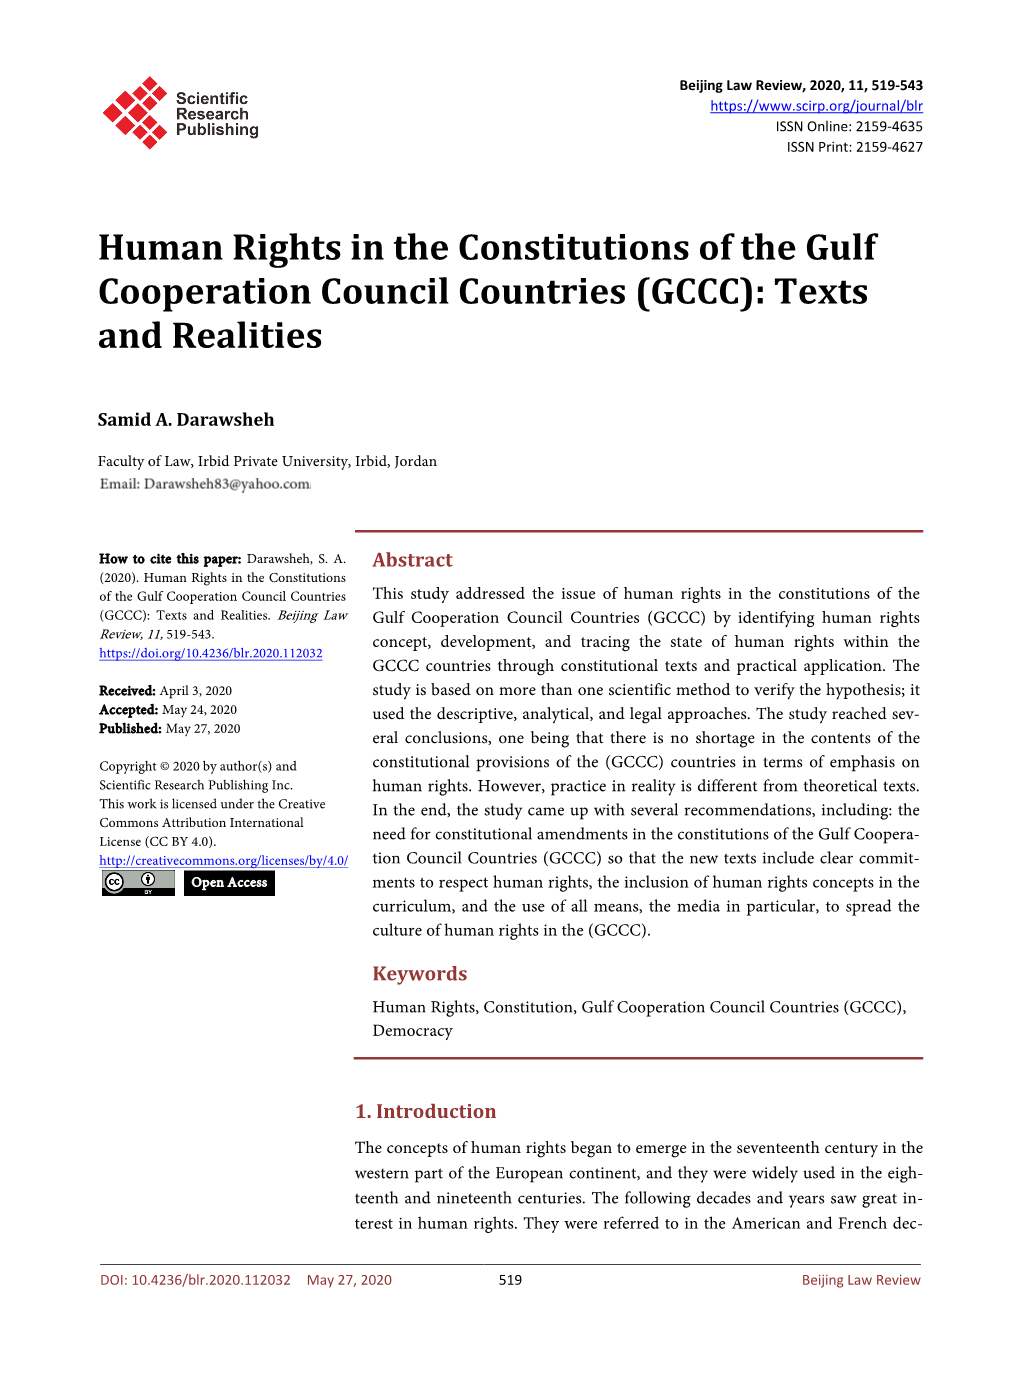 Human Rights in the Constitutions of the Gulf Cooperation Council Countries (GCCC): Texts and Realities